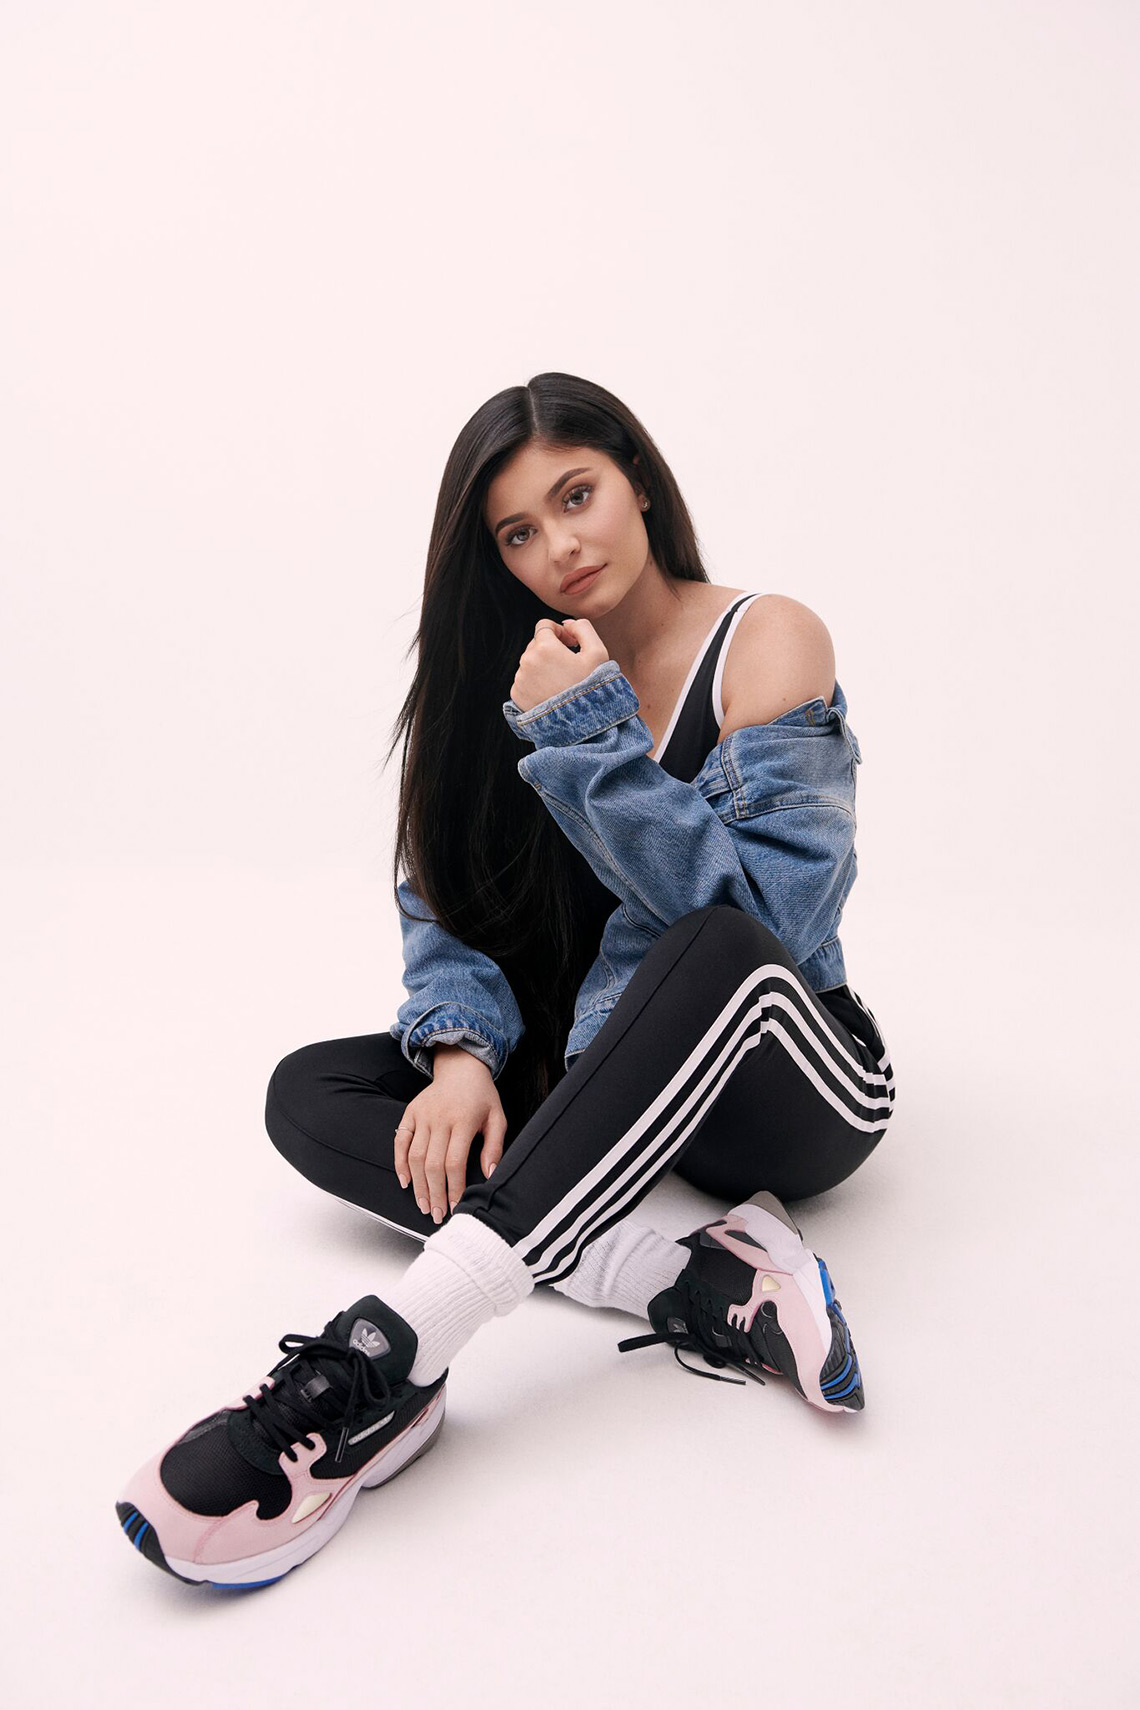 Kylie Jenner adidas Falcon + Release Info SneakerNews.com